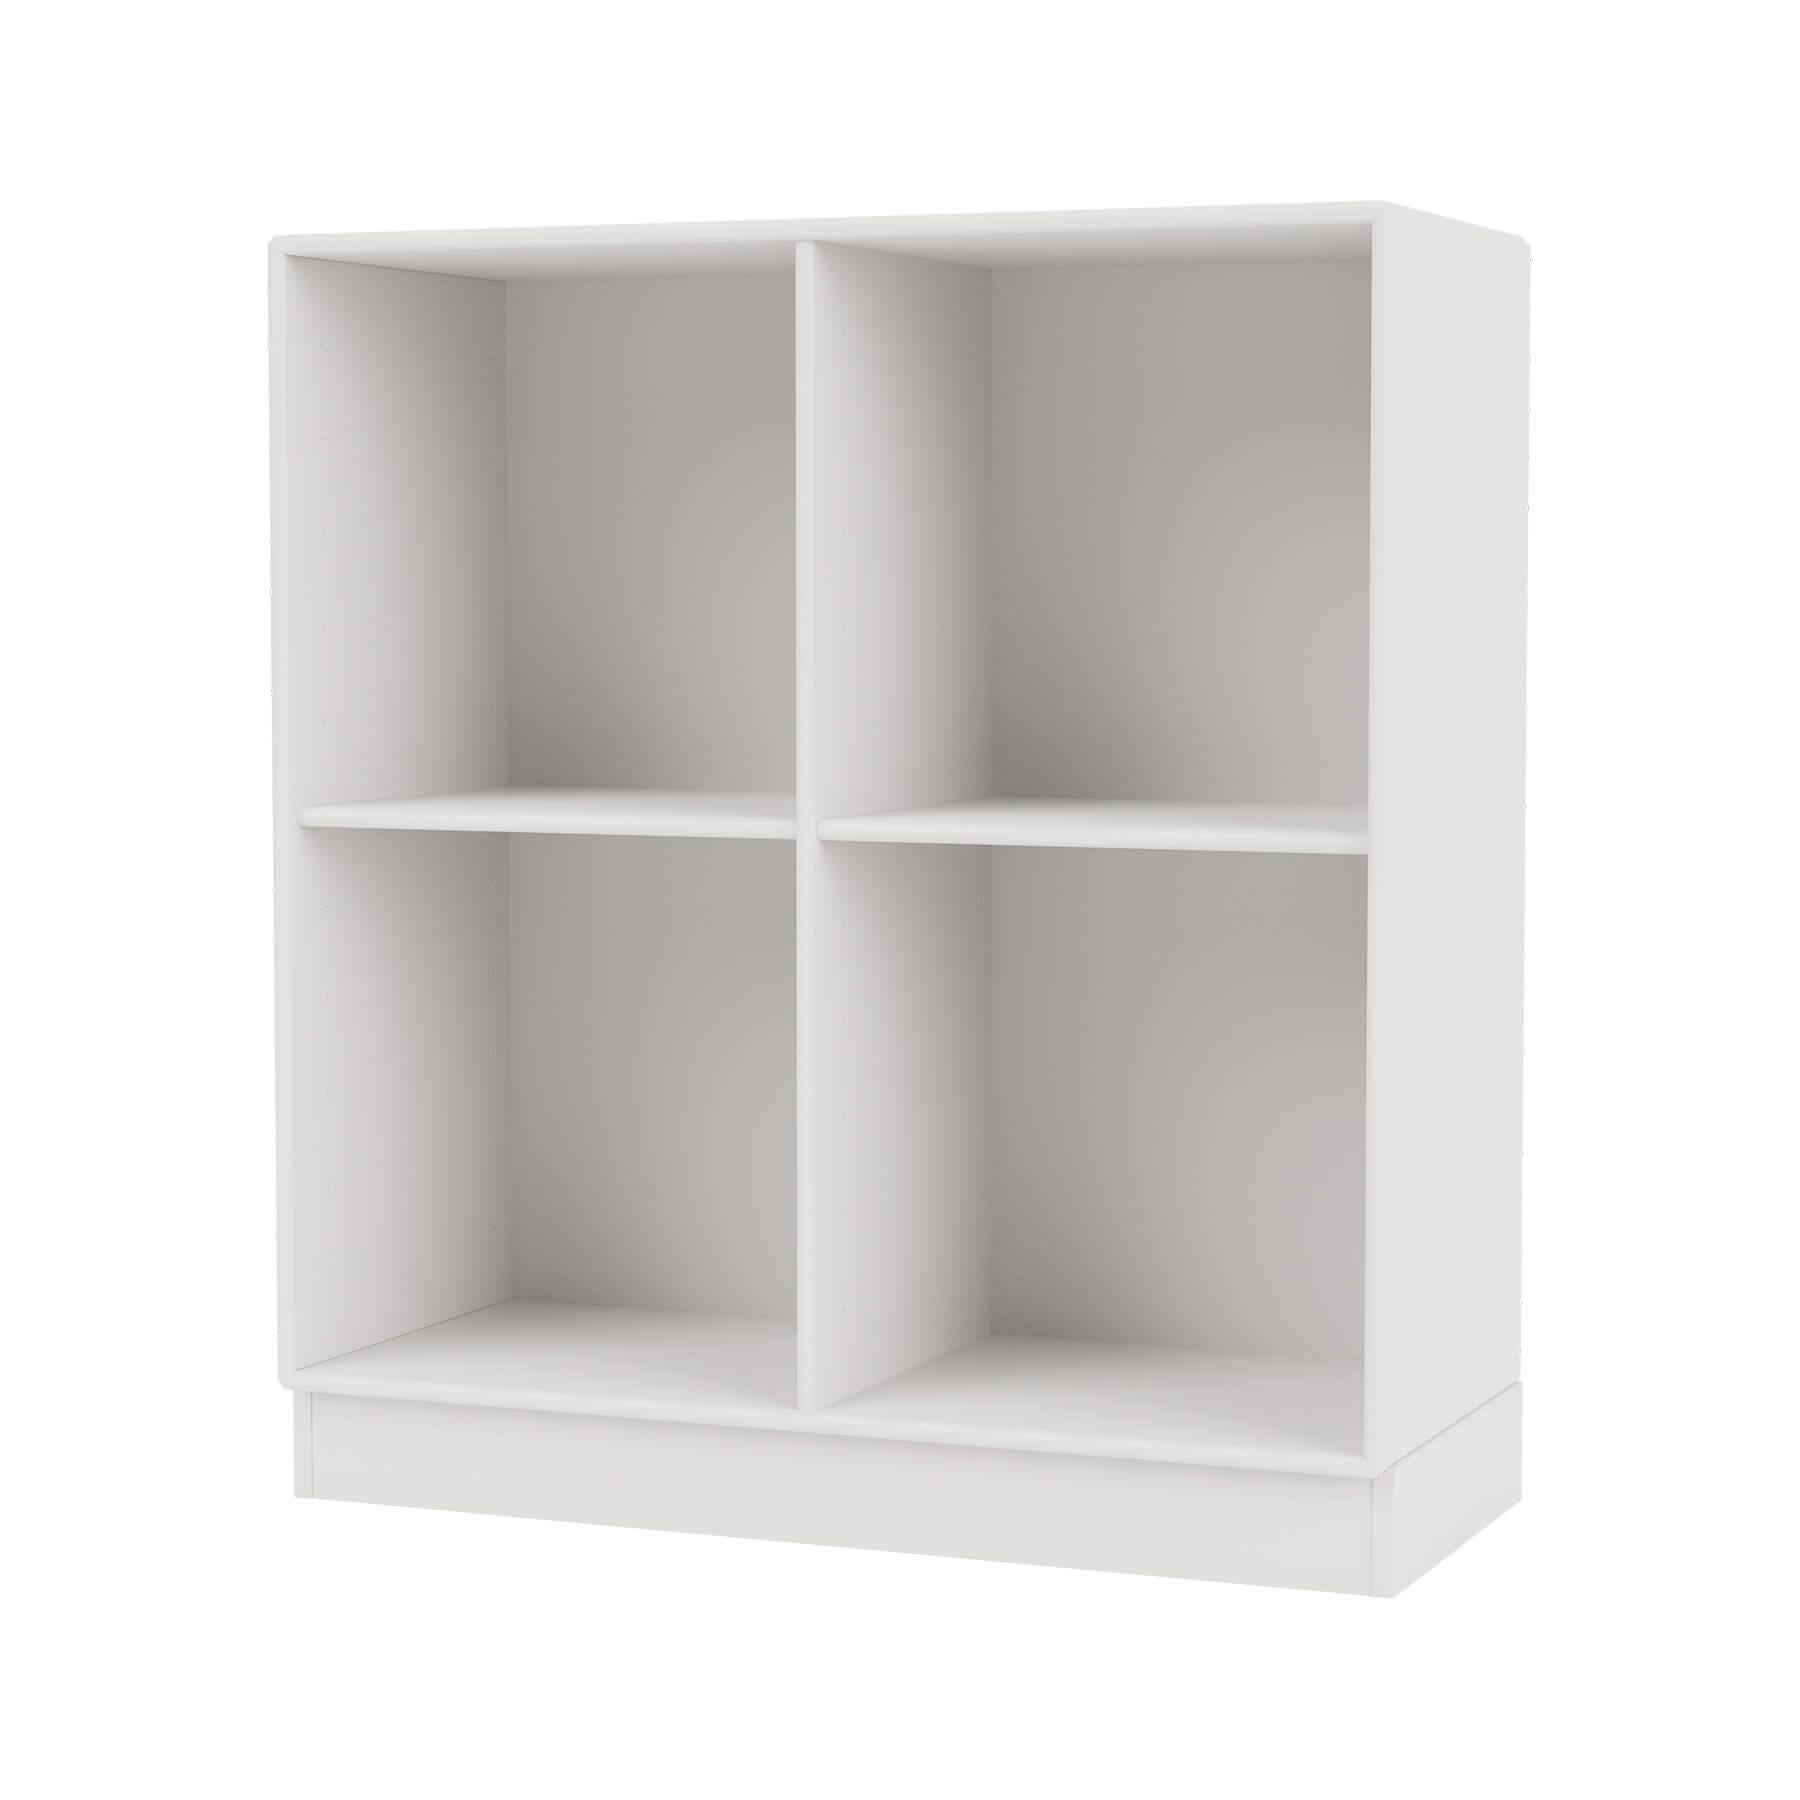 Montana Show Bookcase White Plinth White Designer Furniture From Holloways Of Ludlow